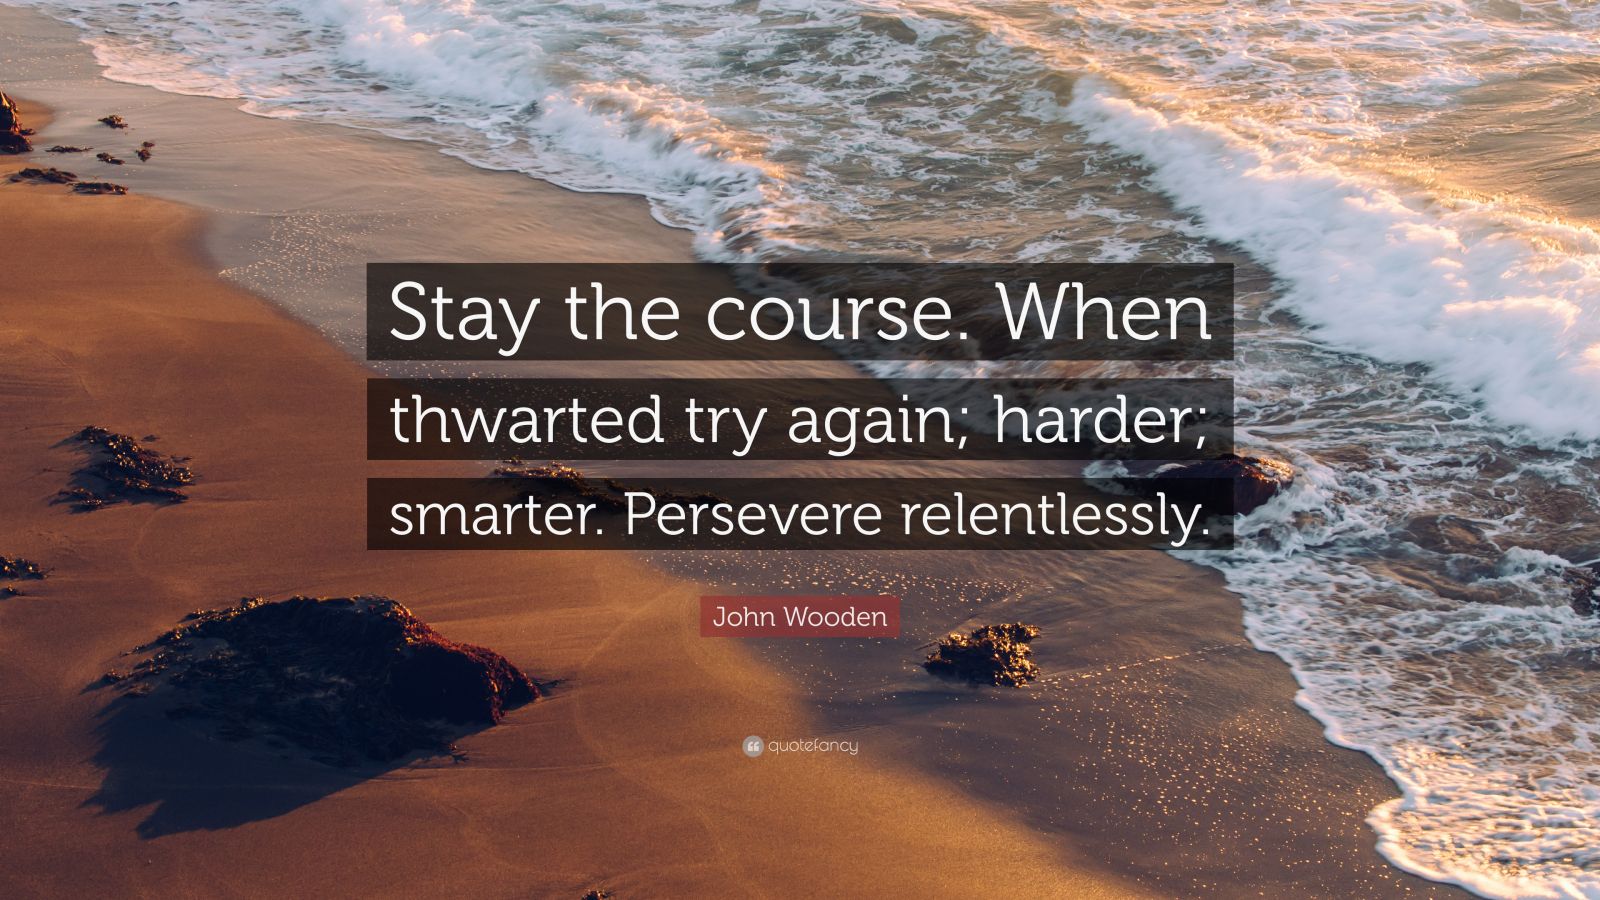 Stay the course quote